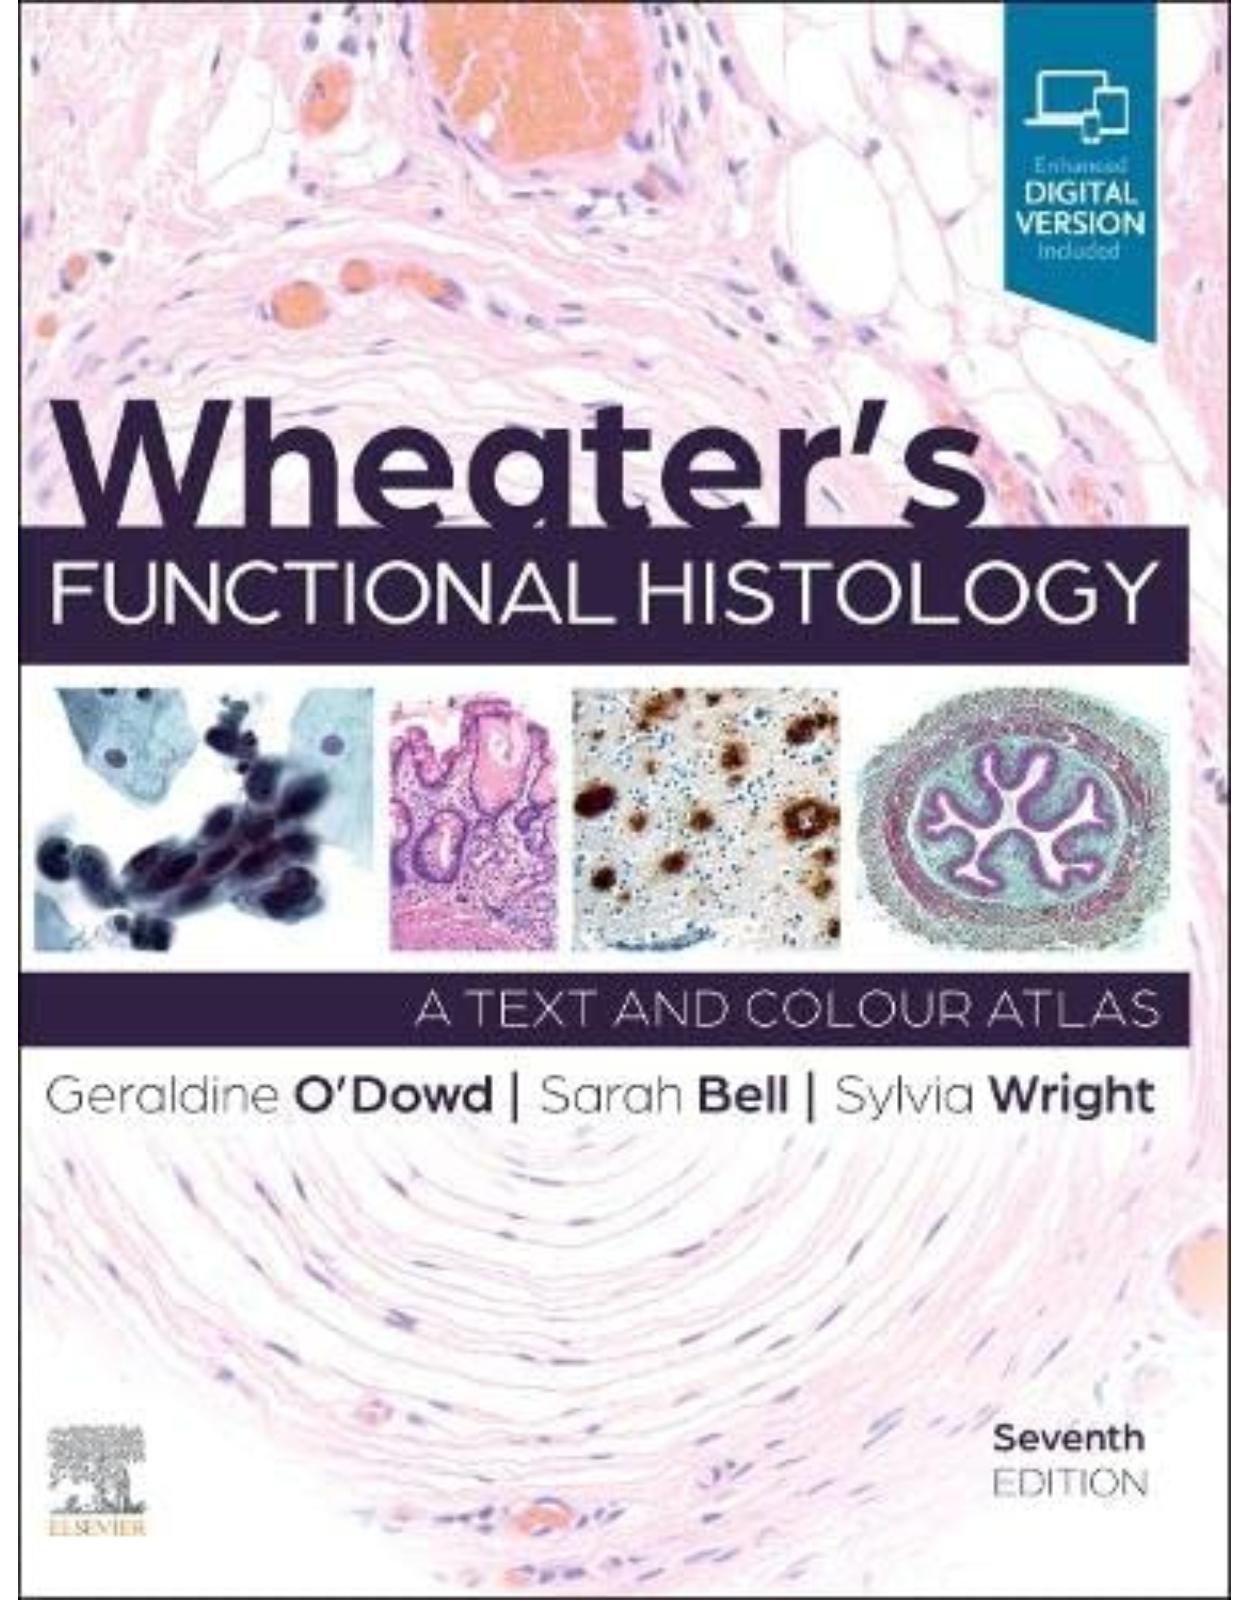 Wheater’s Functional Histology